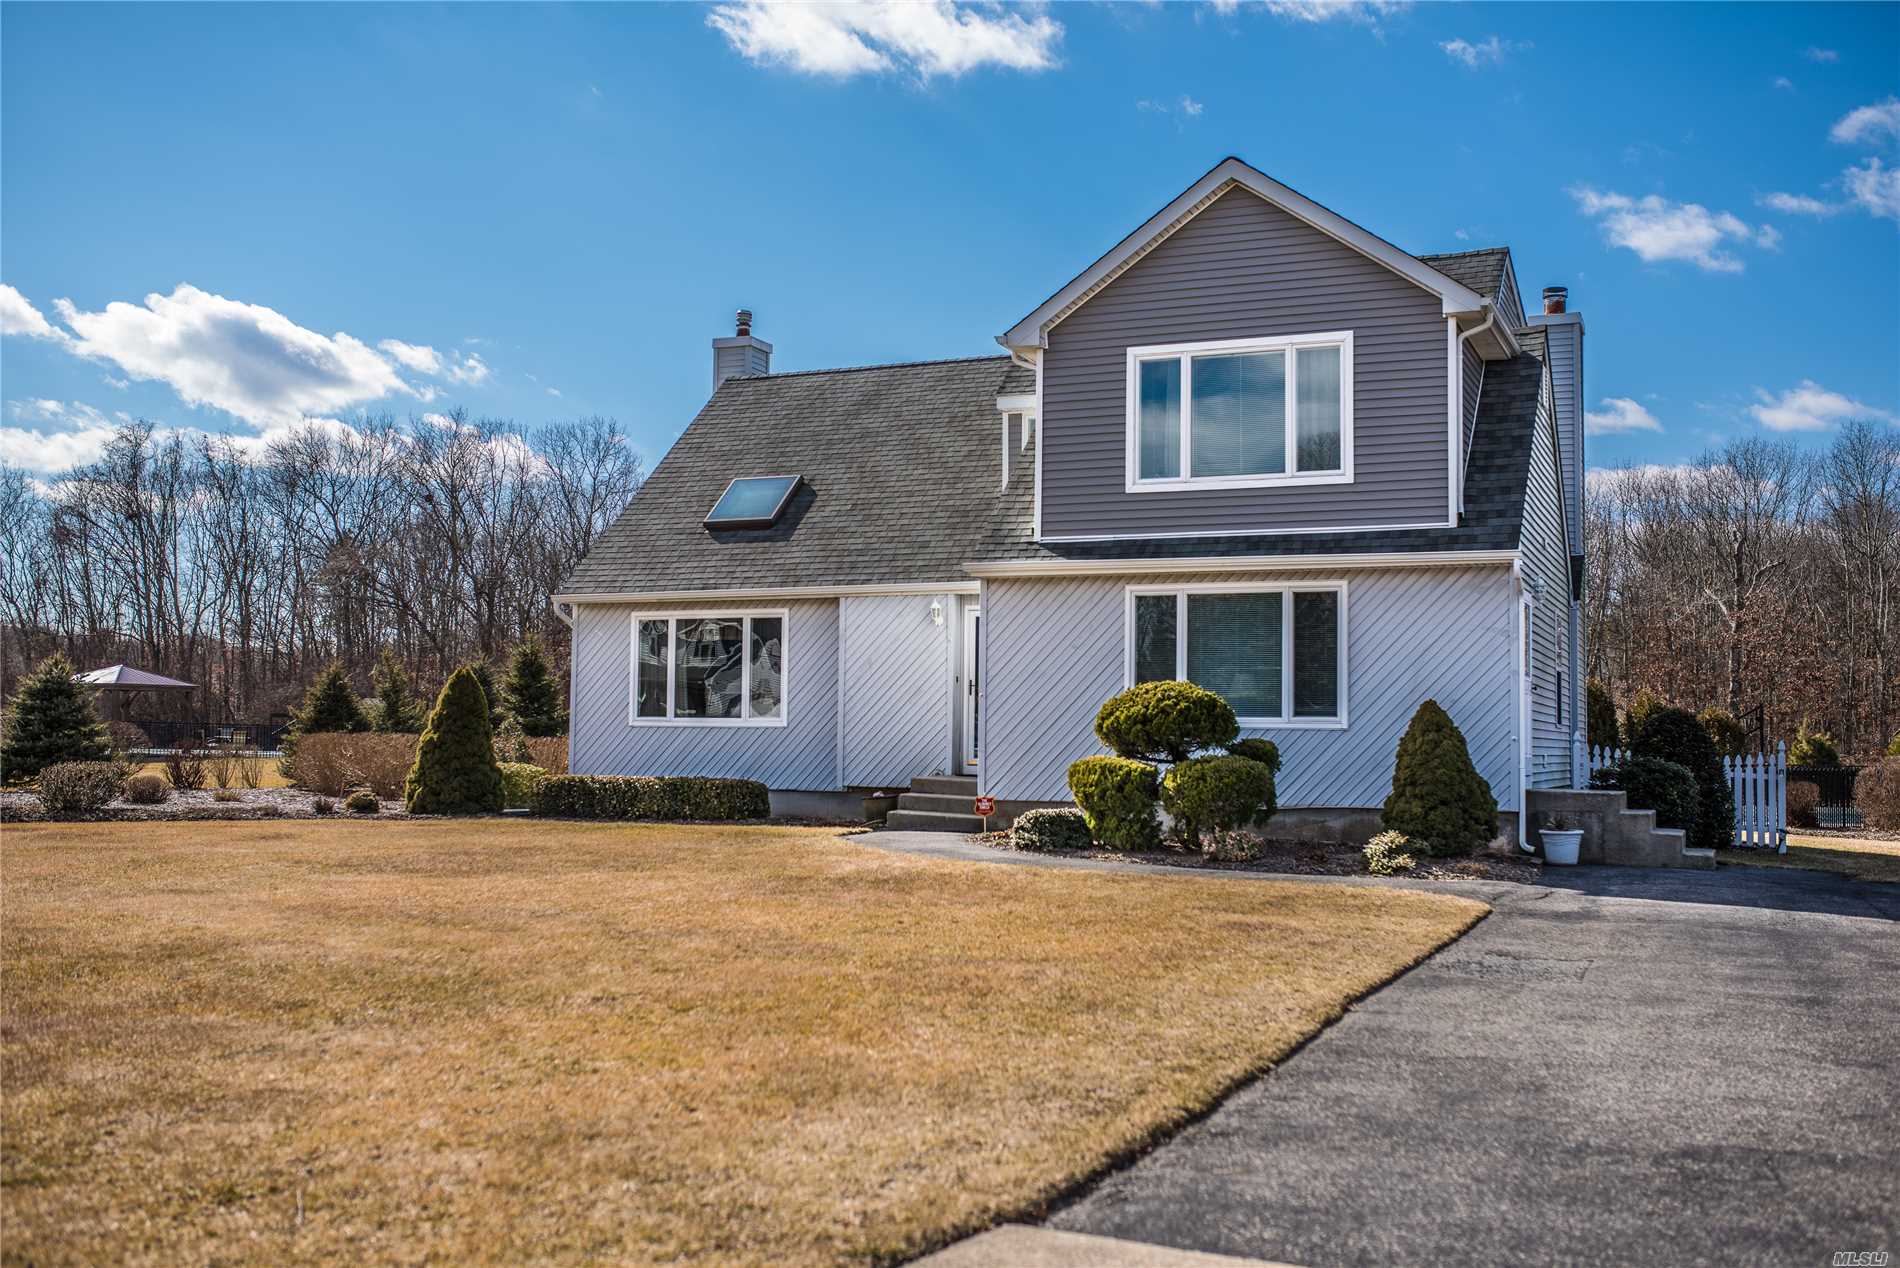 Renovated 4/5 Home On Beautiful Street In Manorville Features: Hardwood Floors, Fam Rm W/Fireplace, Master Bedroom Suite W/Full Bath, 3.5 Bathrooms, Full Finished Basement, New Roof & Hw Heater, Security System, Central Air Conditioning, Large Yard W/In Ground Pool, Basketball Court And In Ground Sprinklers.